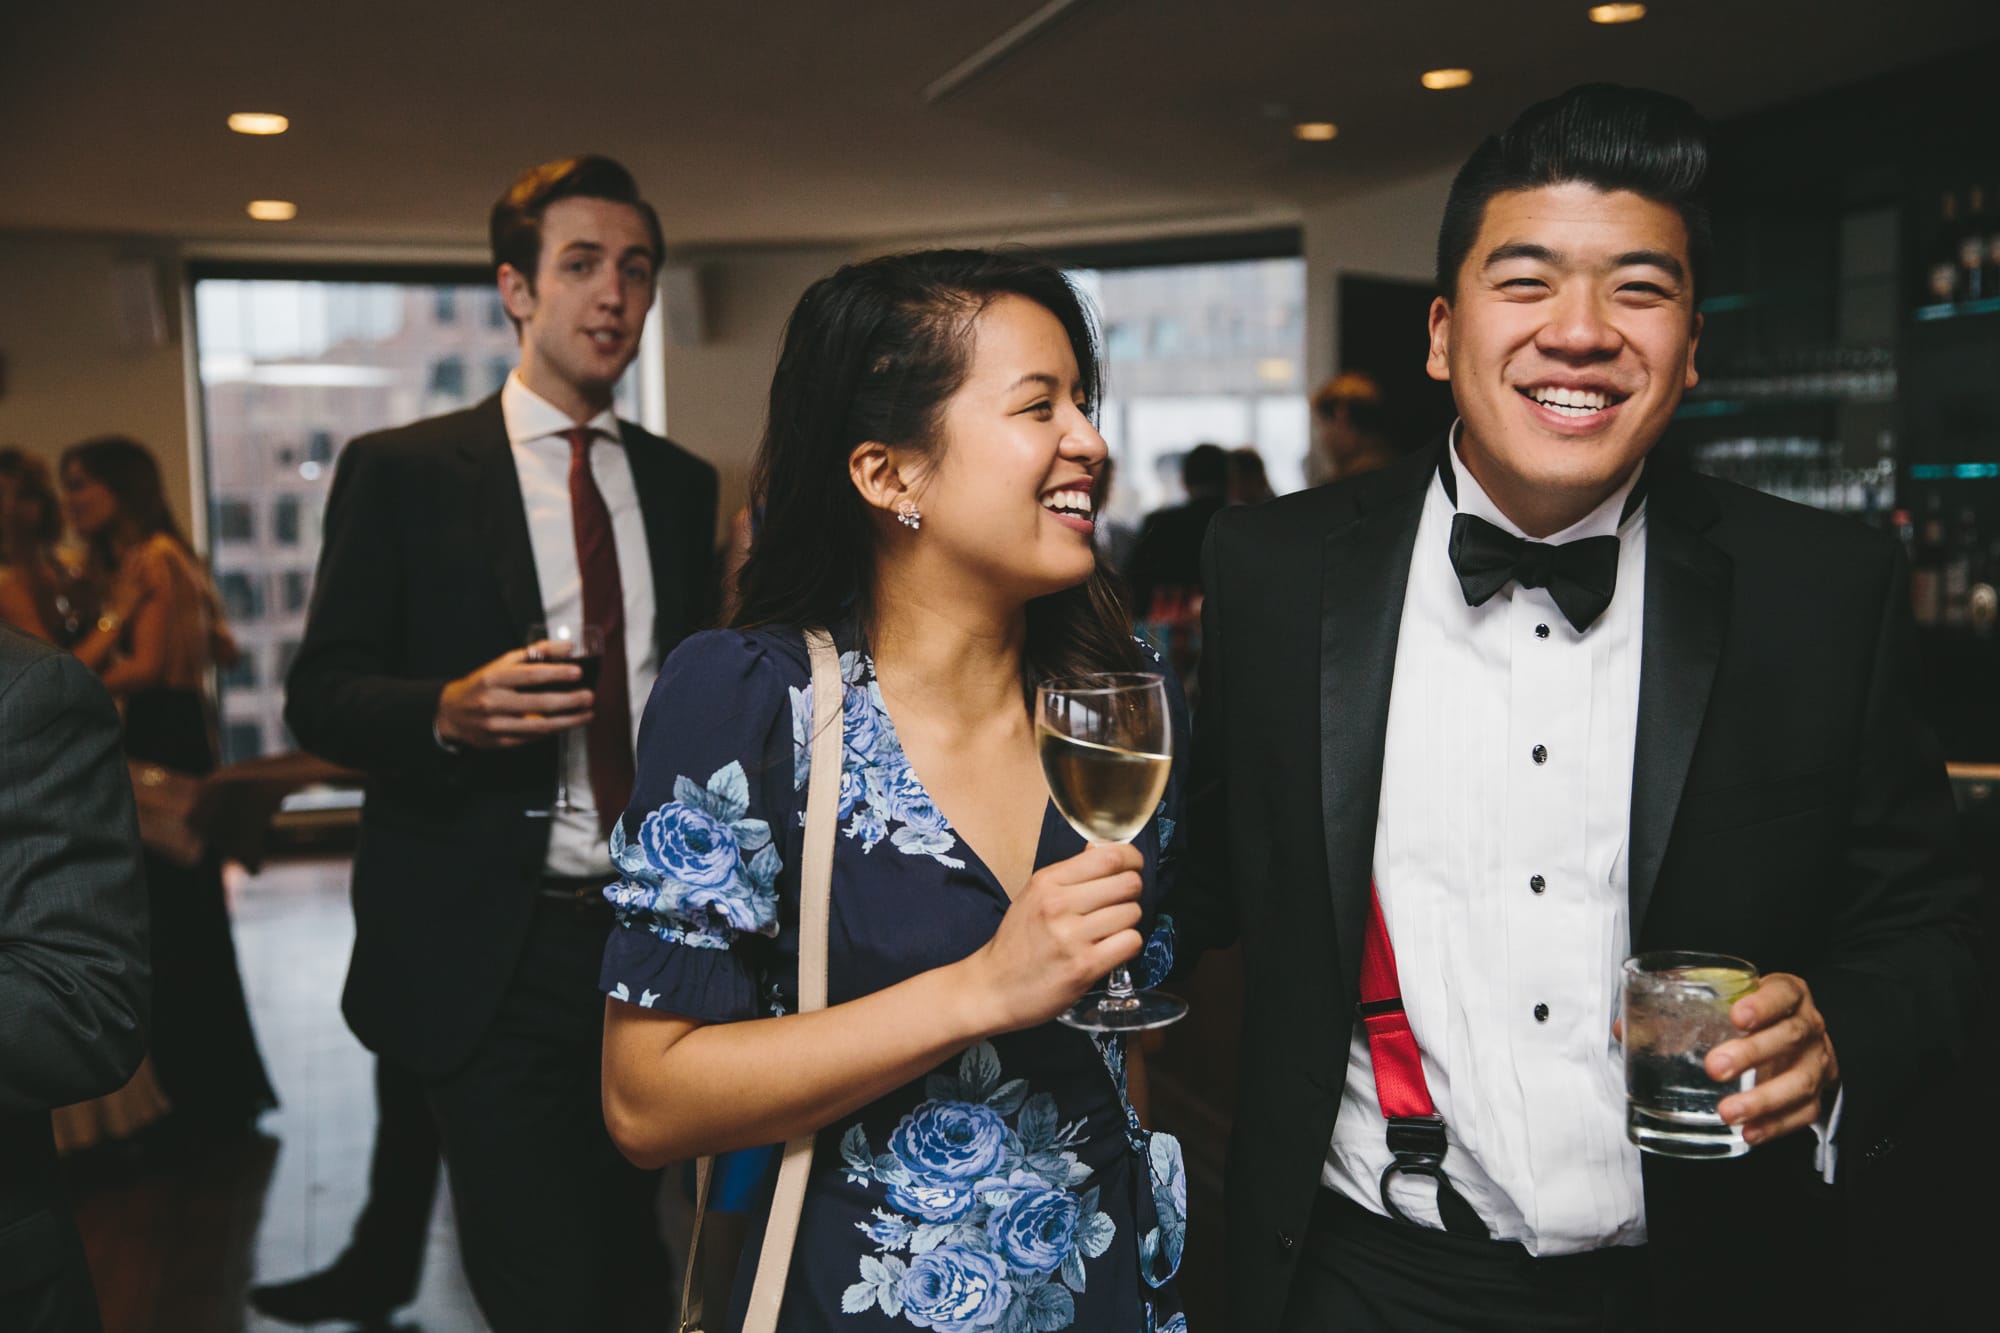 A documentary photograph of wedding guests talking and laughing during the cocktail hour of a State Room Wedding in Boston, Massachusetts